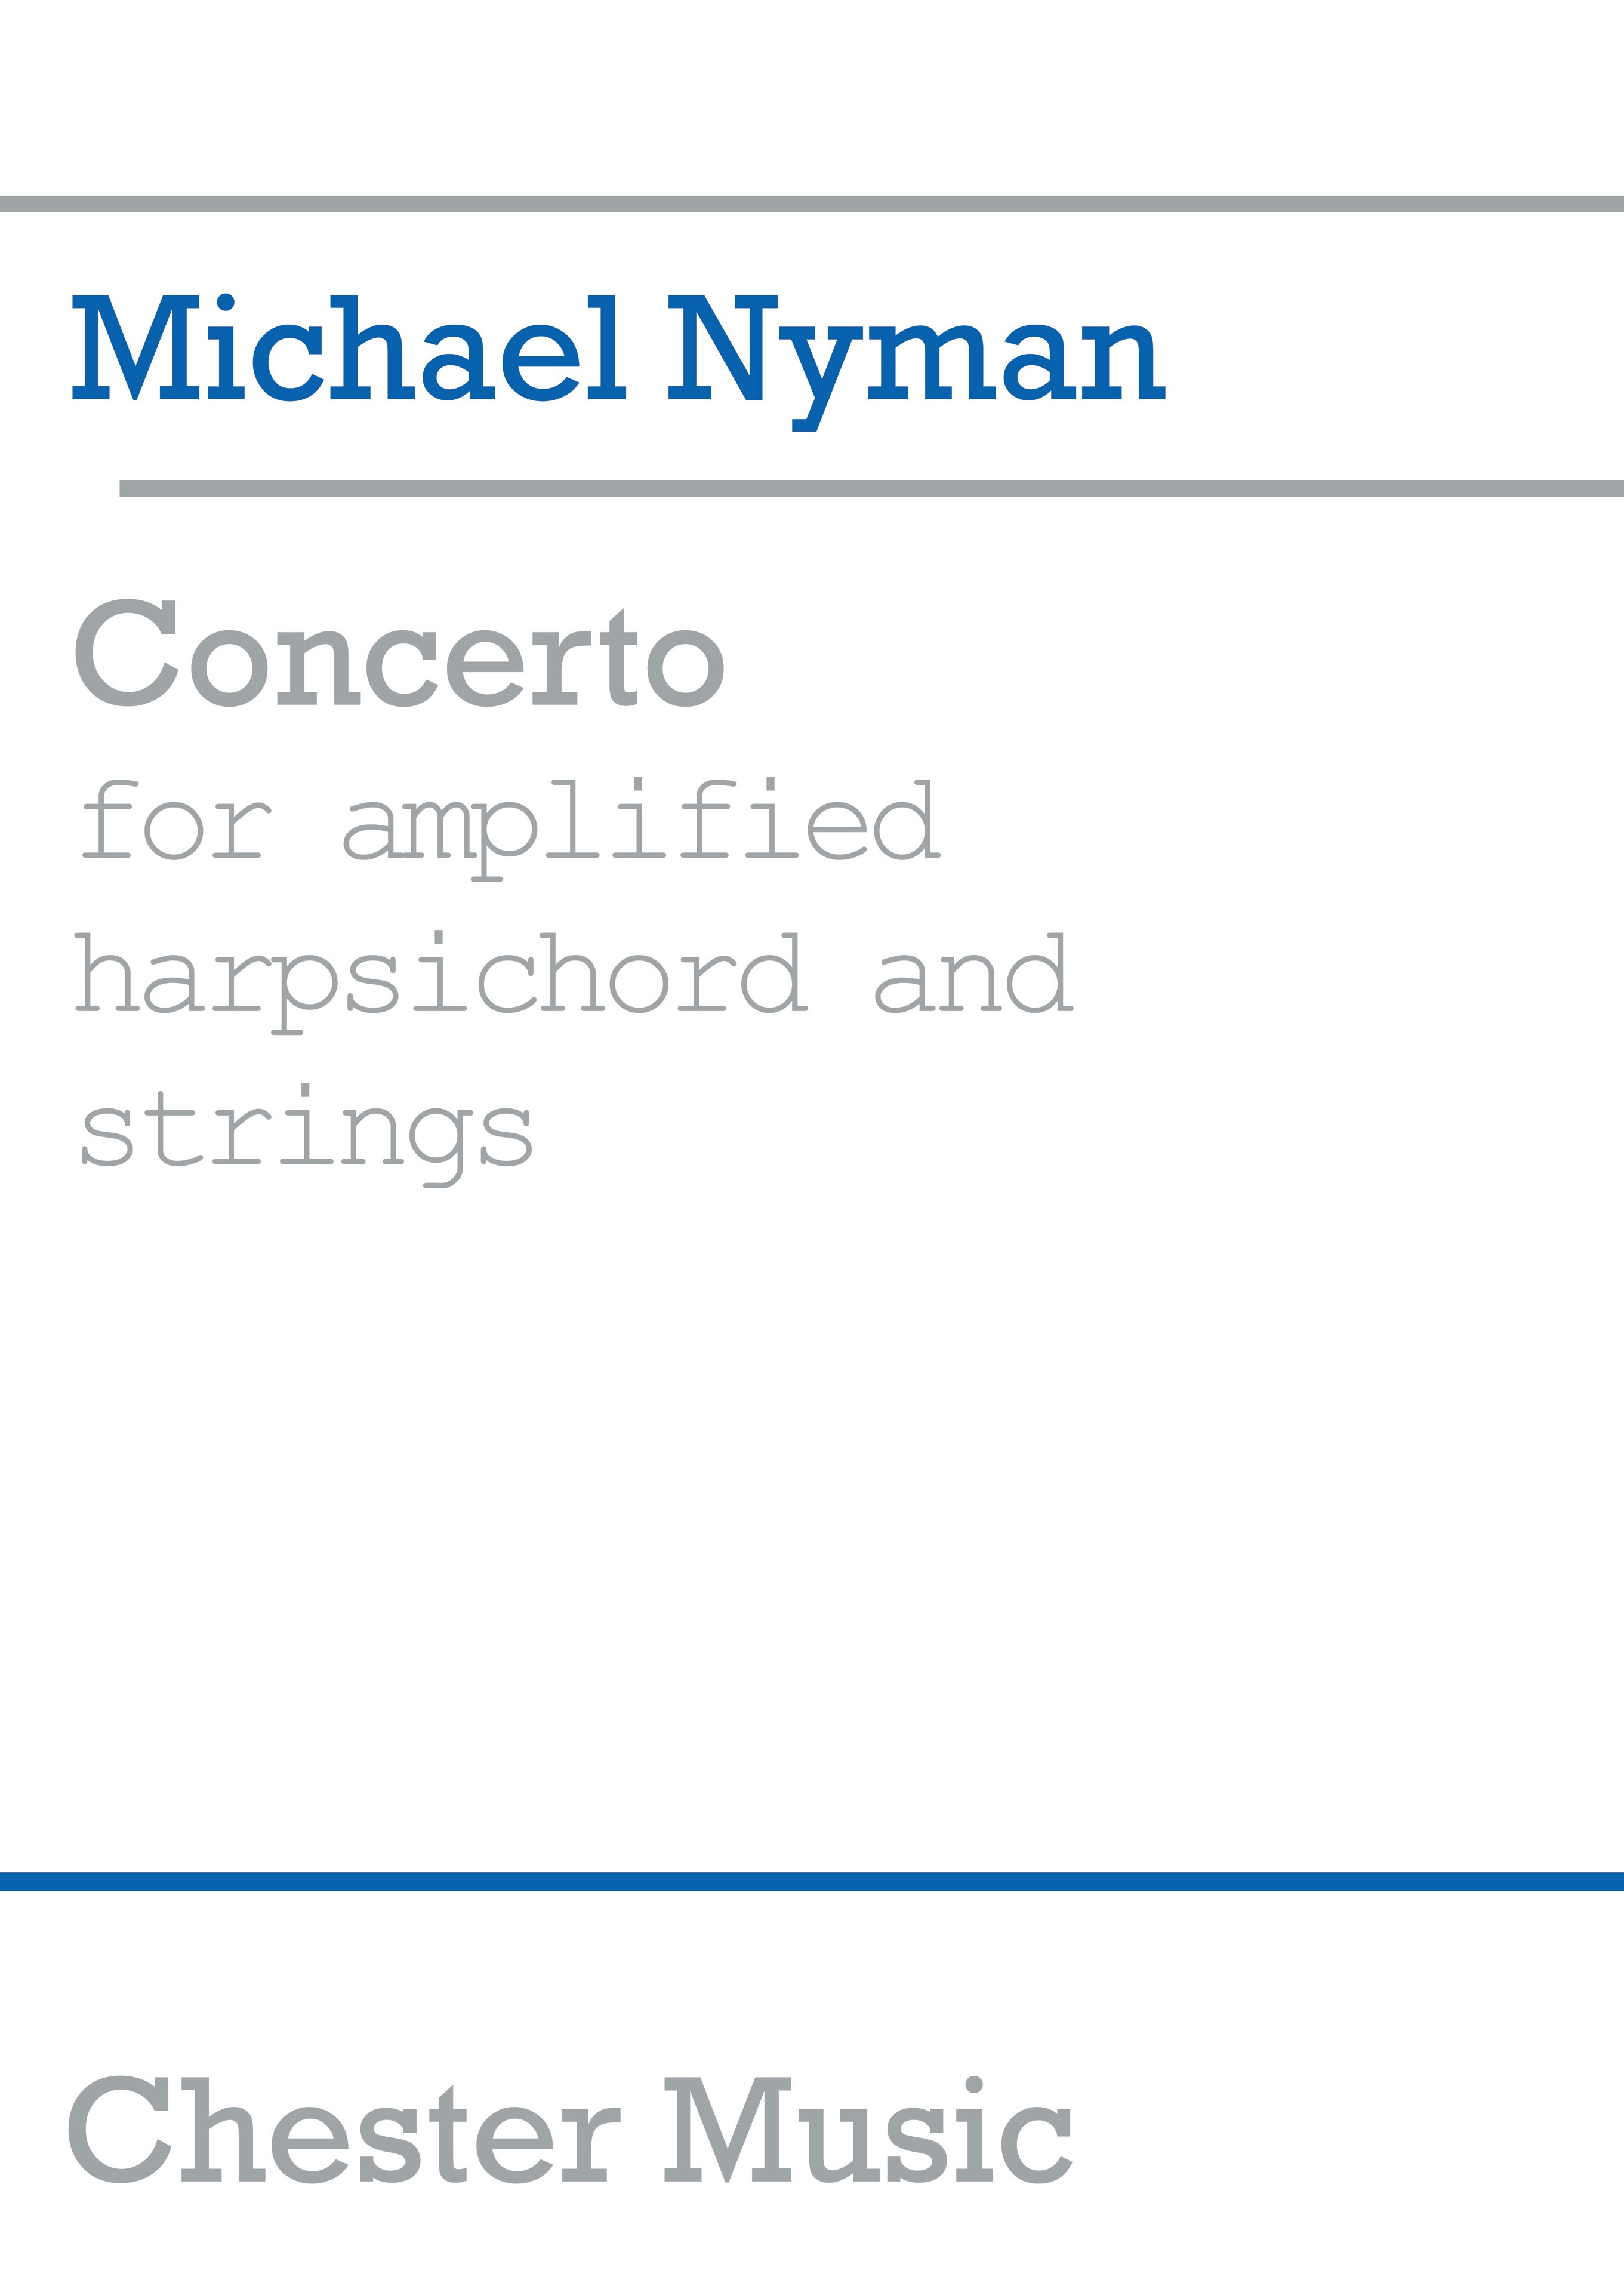 Michael Nyman: Concerto For Amplified Harpsichord And Strings: Harpsichord: